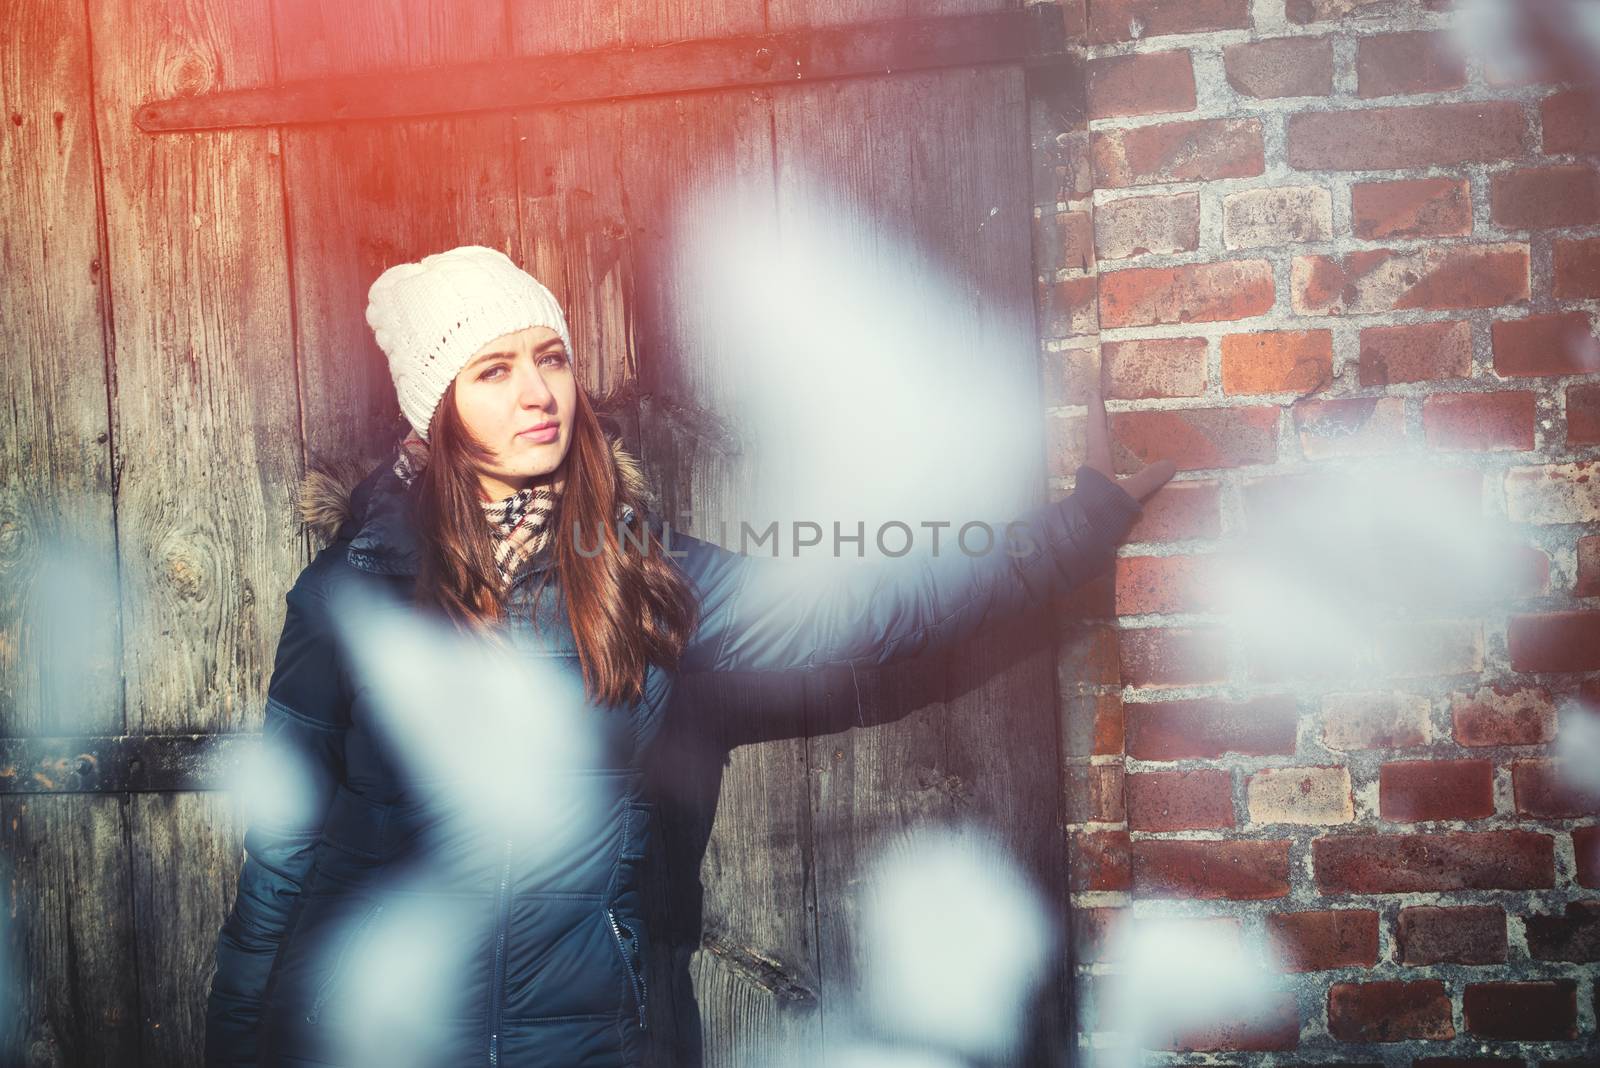 An image of young woman on a walk in snowy winter